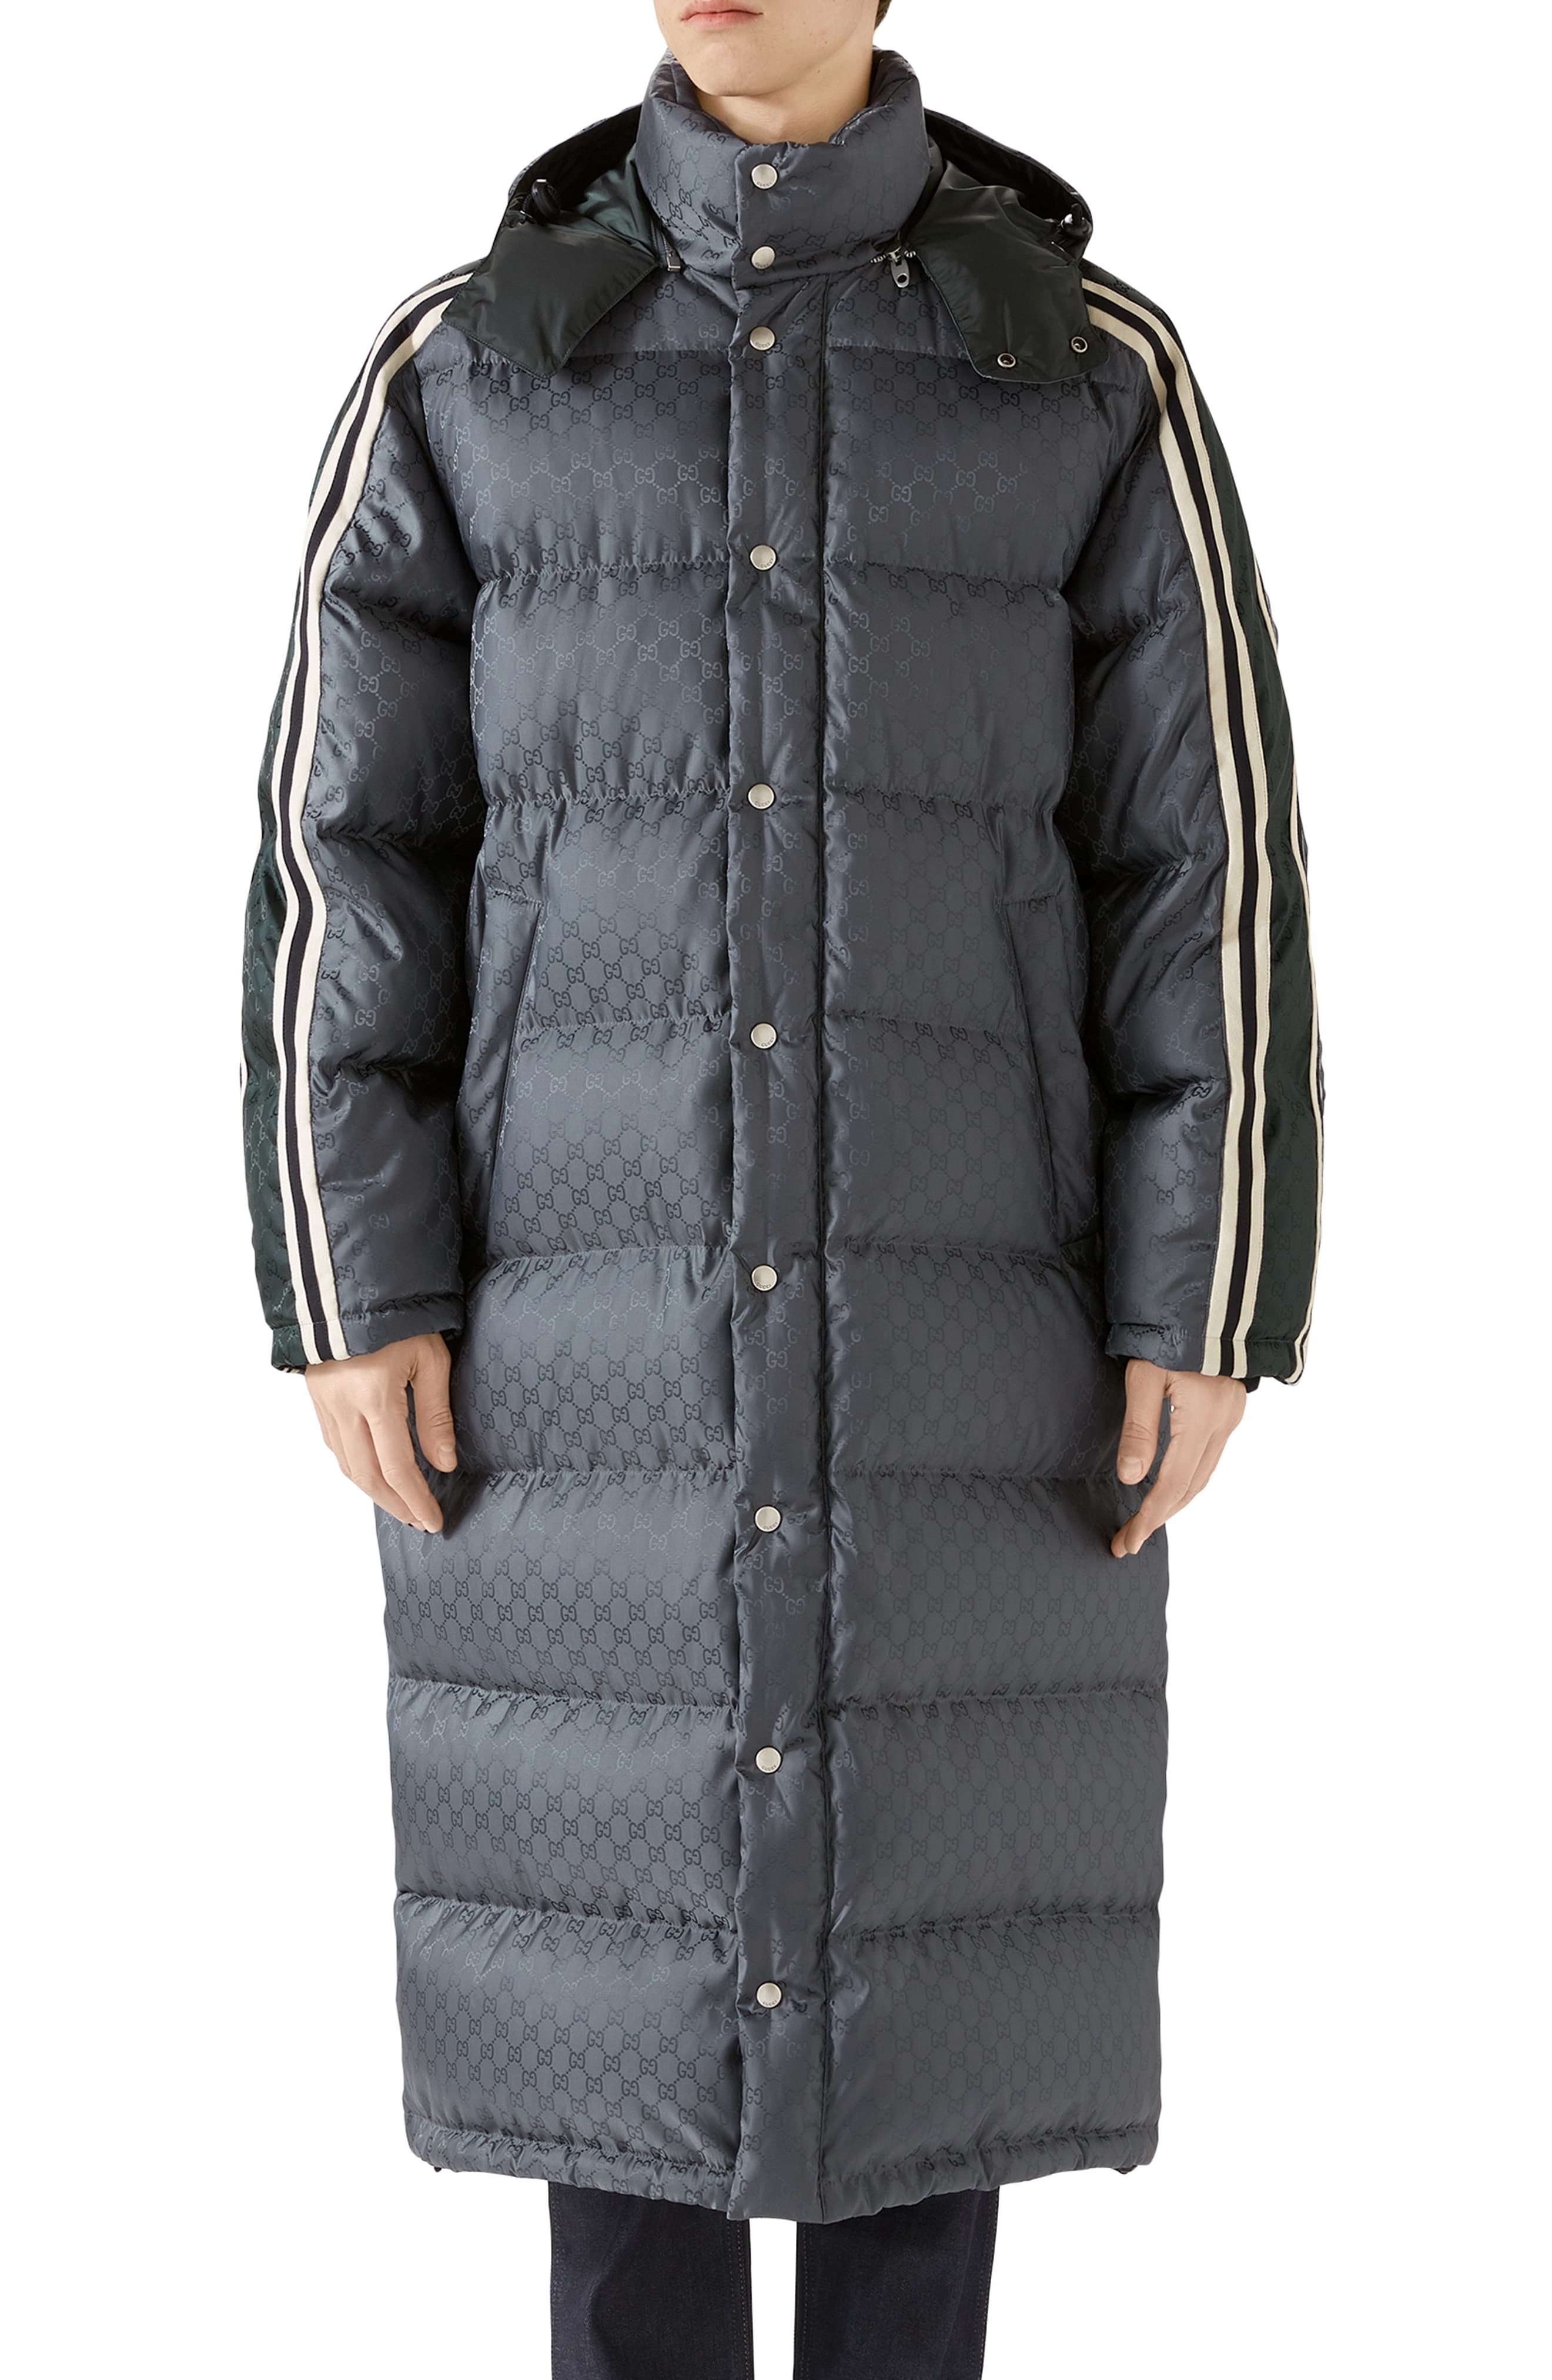 shorthand Bother fan Gucci Gg Jacquard Quilted Down Nylon Coat, $3,600 | Nordstrom | Lookastic